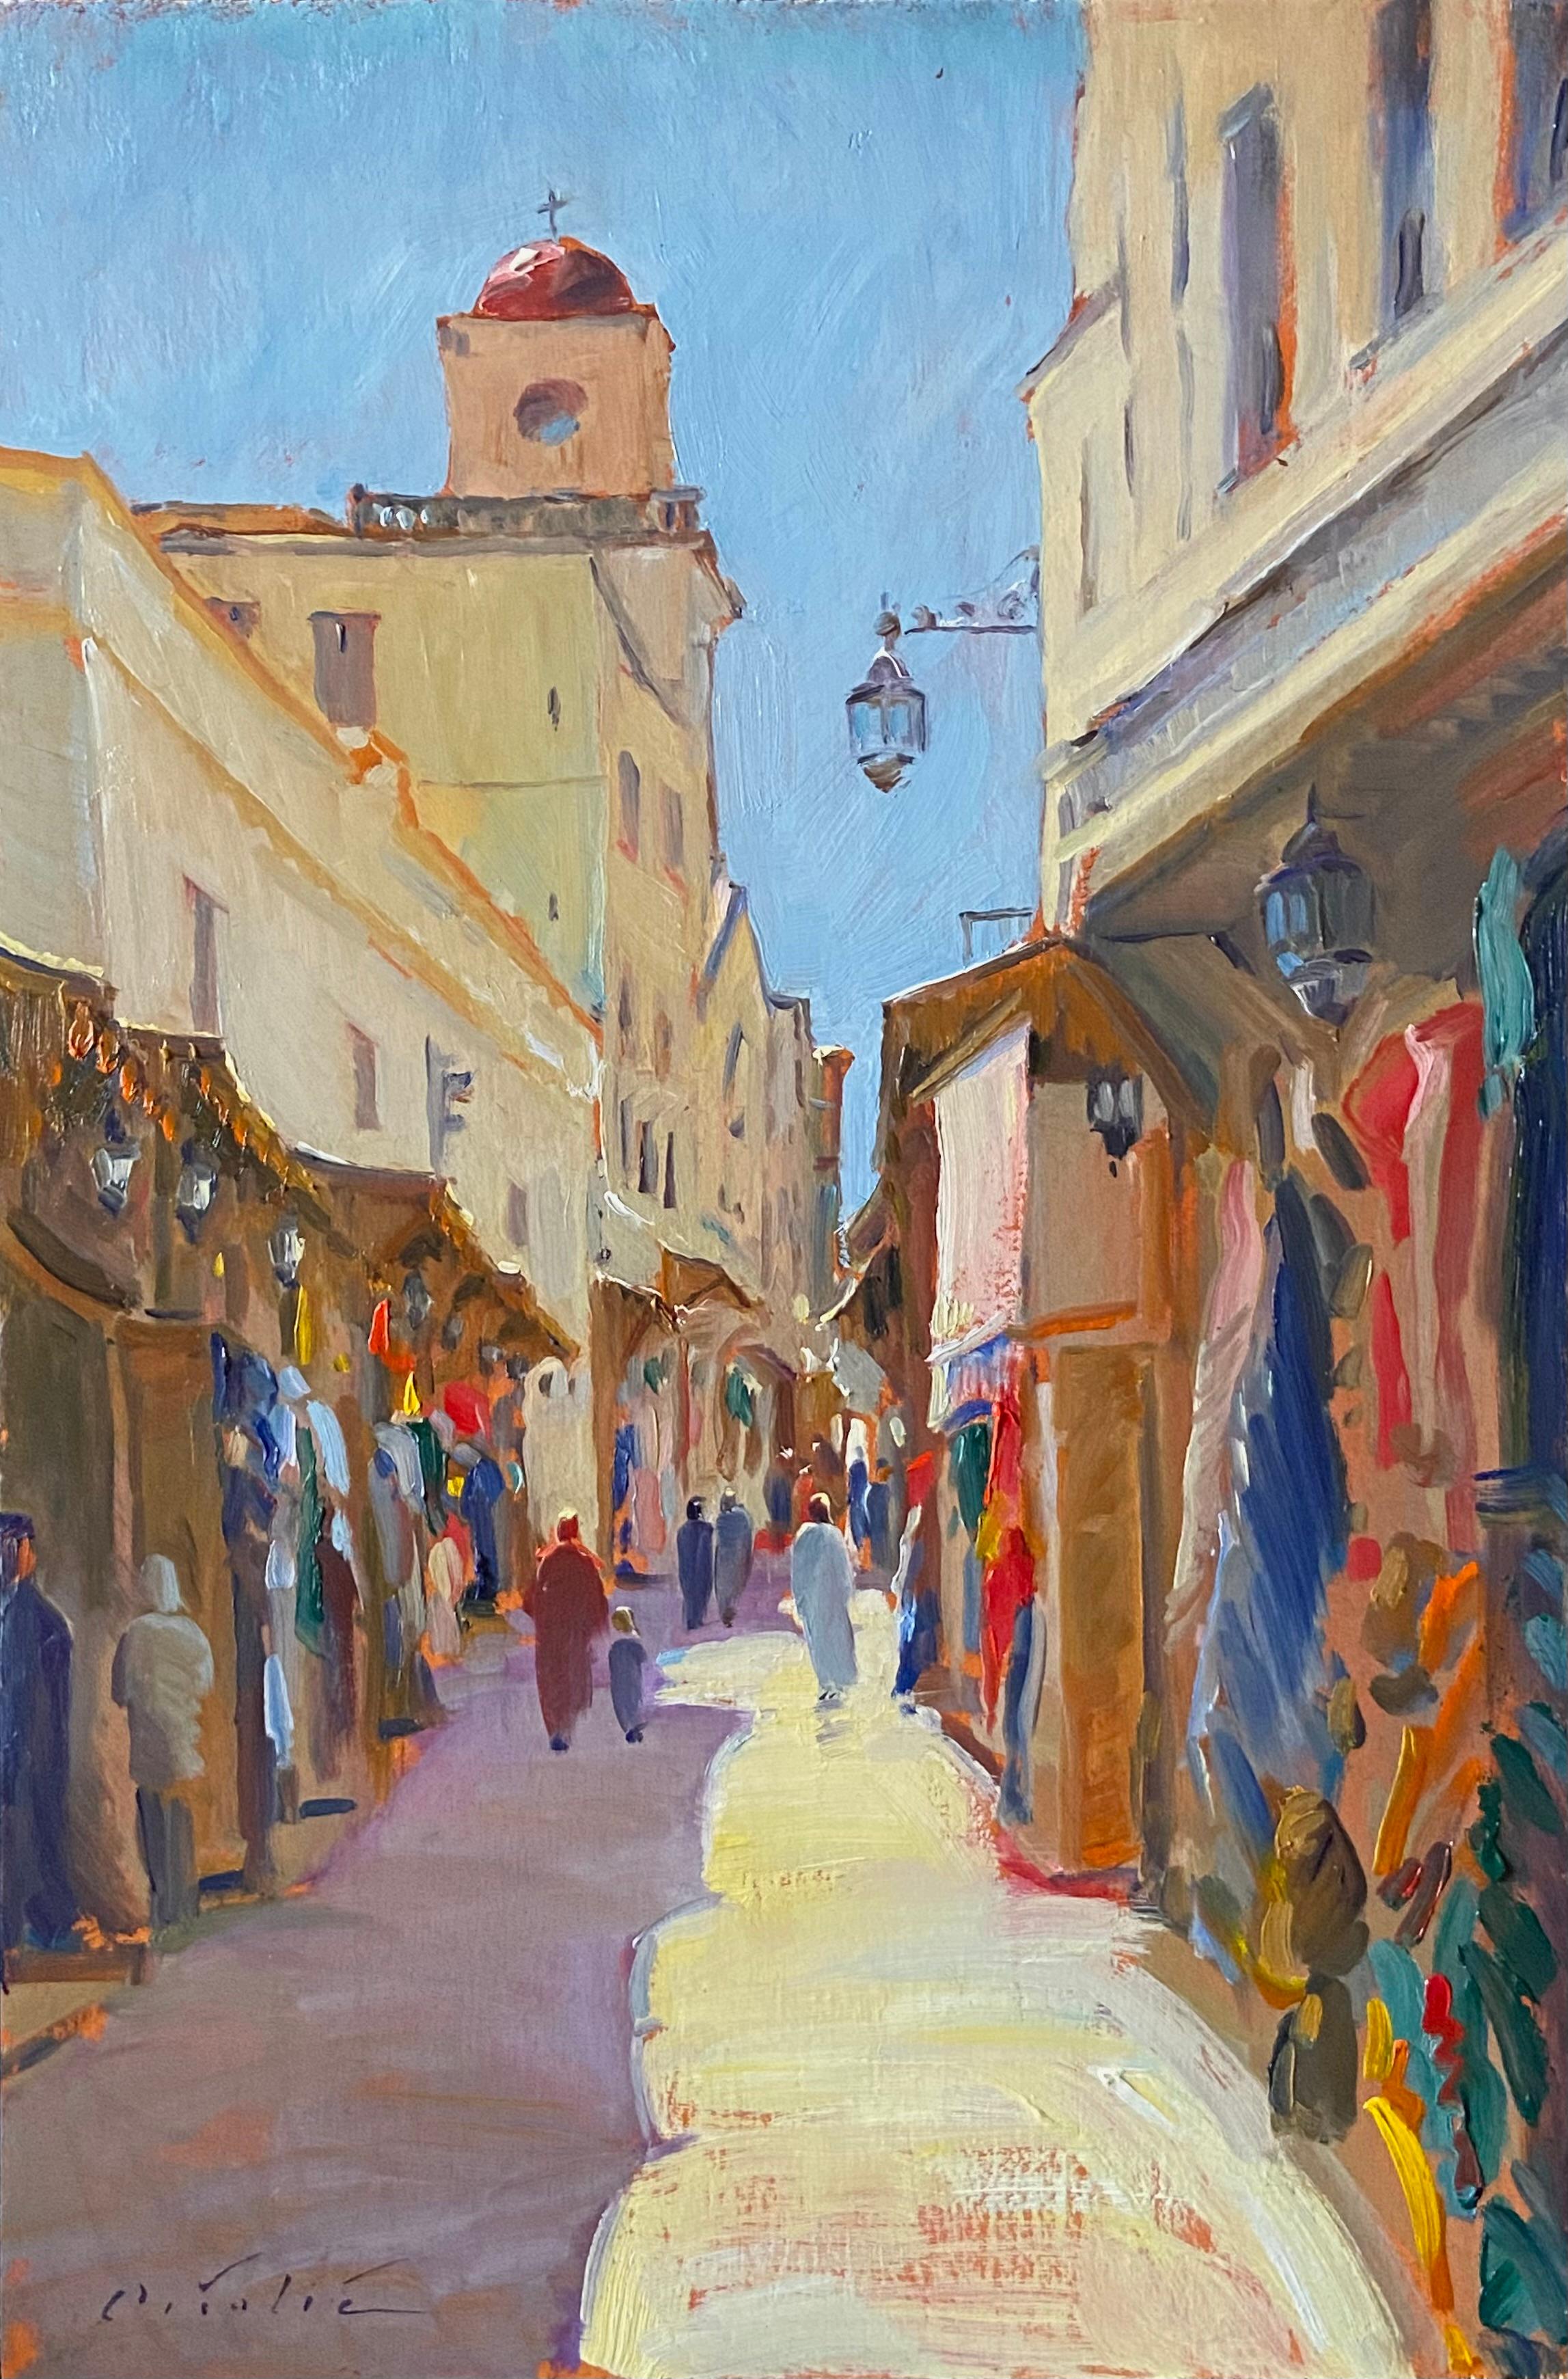 Tina Orsolic Dalessio Landscape Painting - Market Stalls in the Medina, Tangier